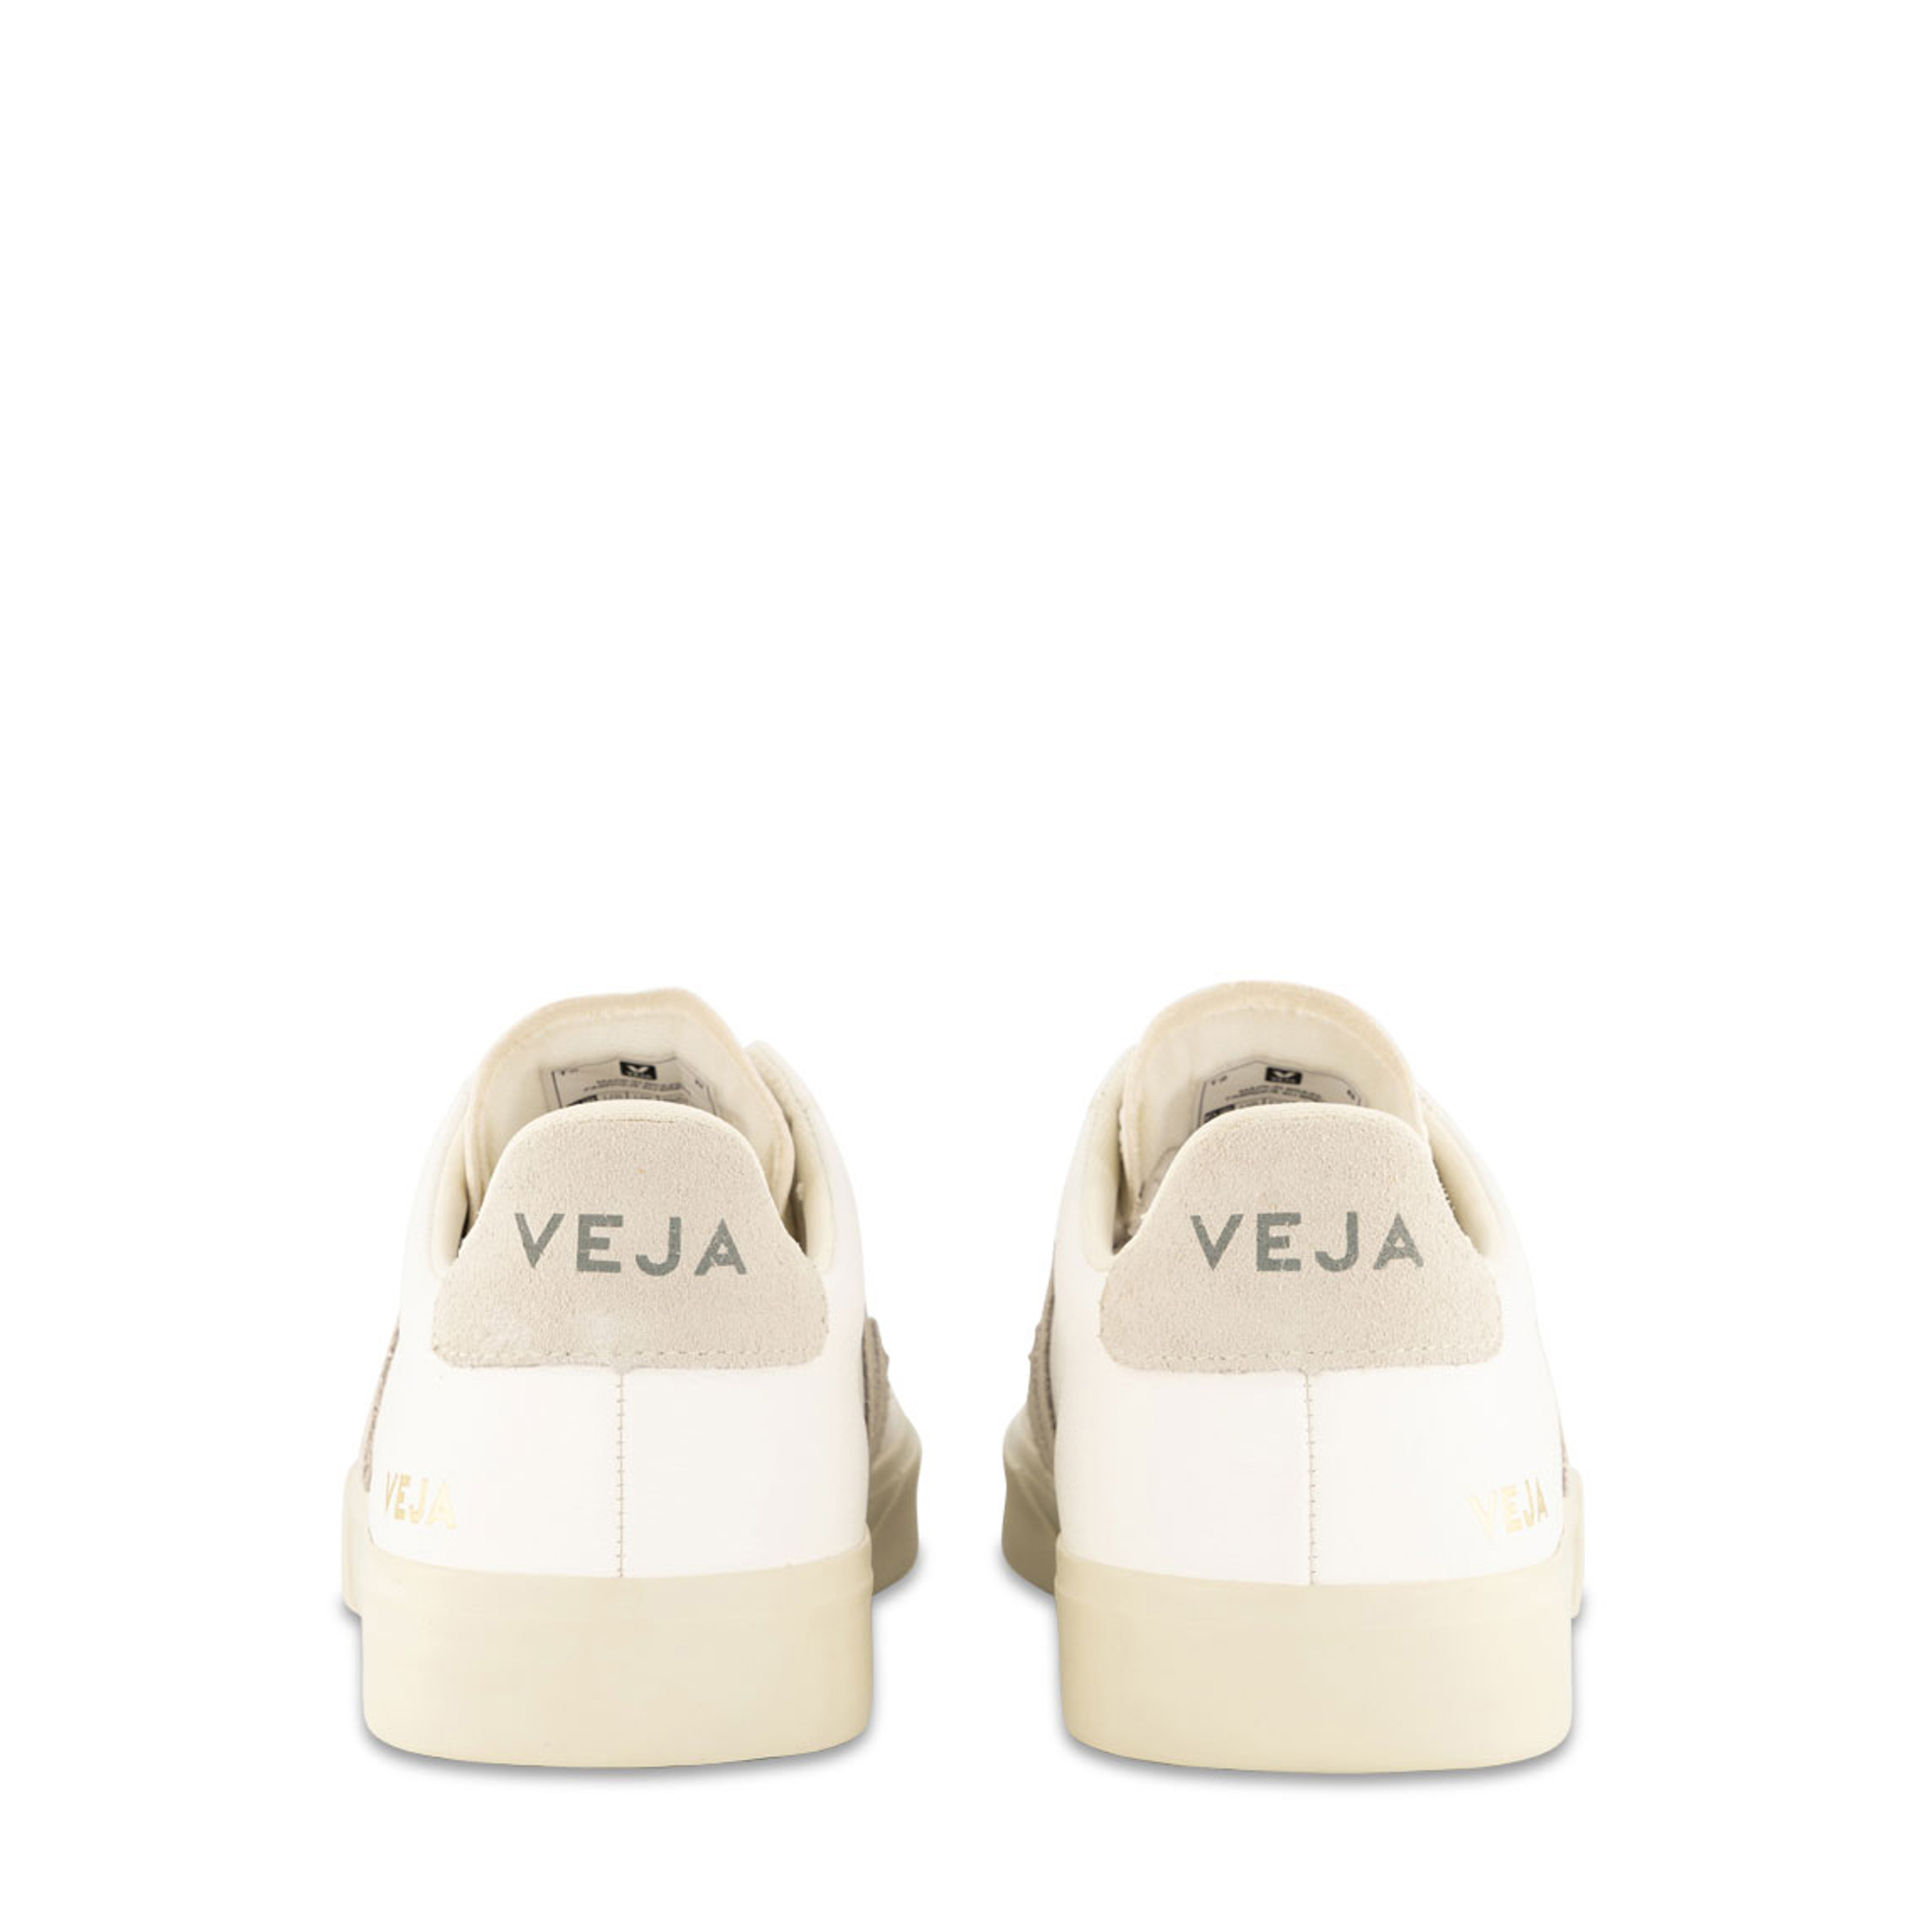 VEJA Campo Extra White/Natural Suede | Hype DC